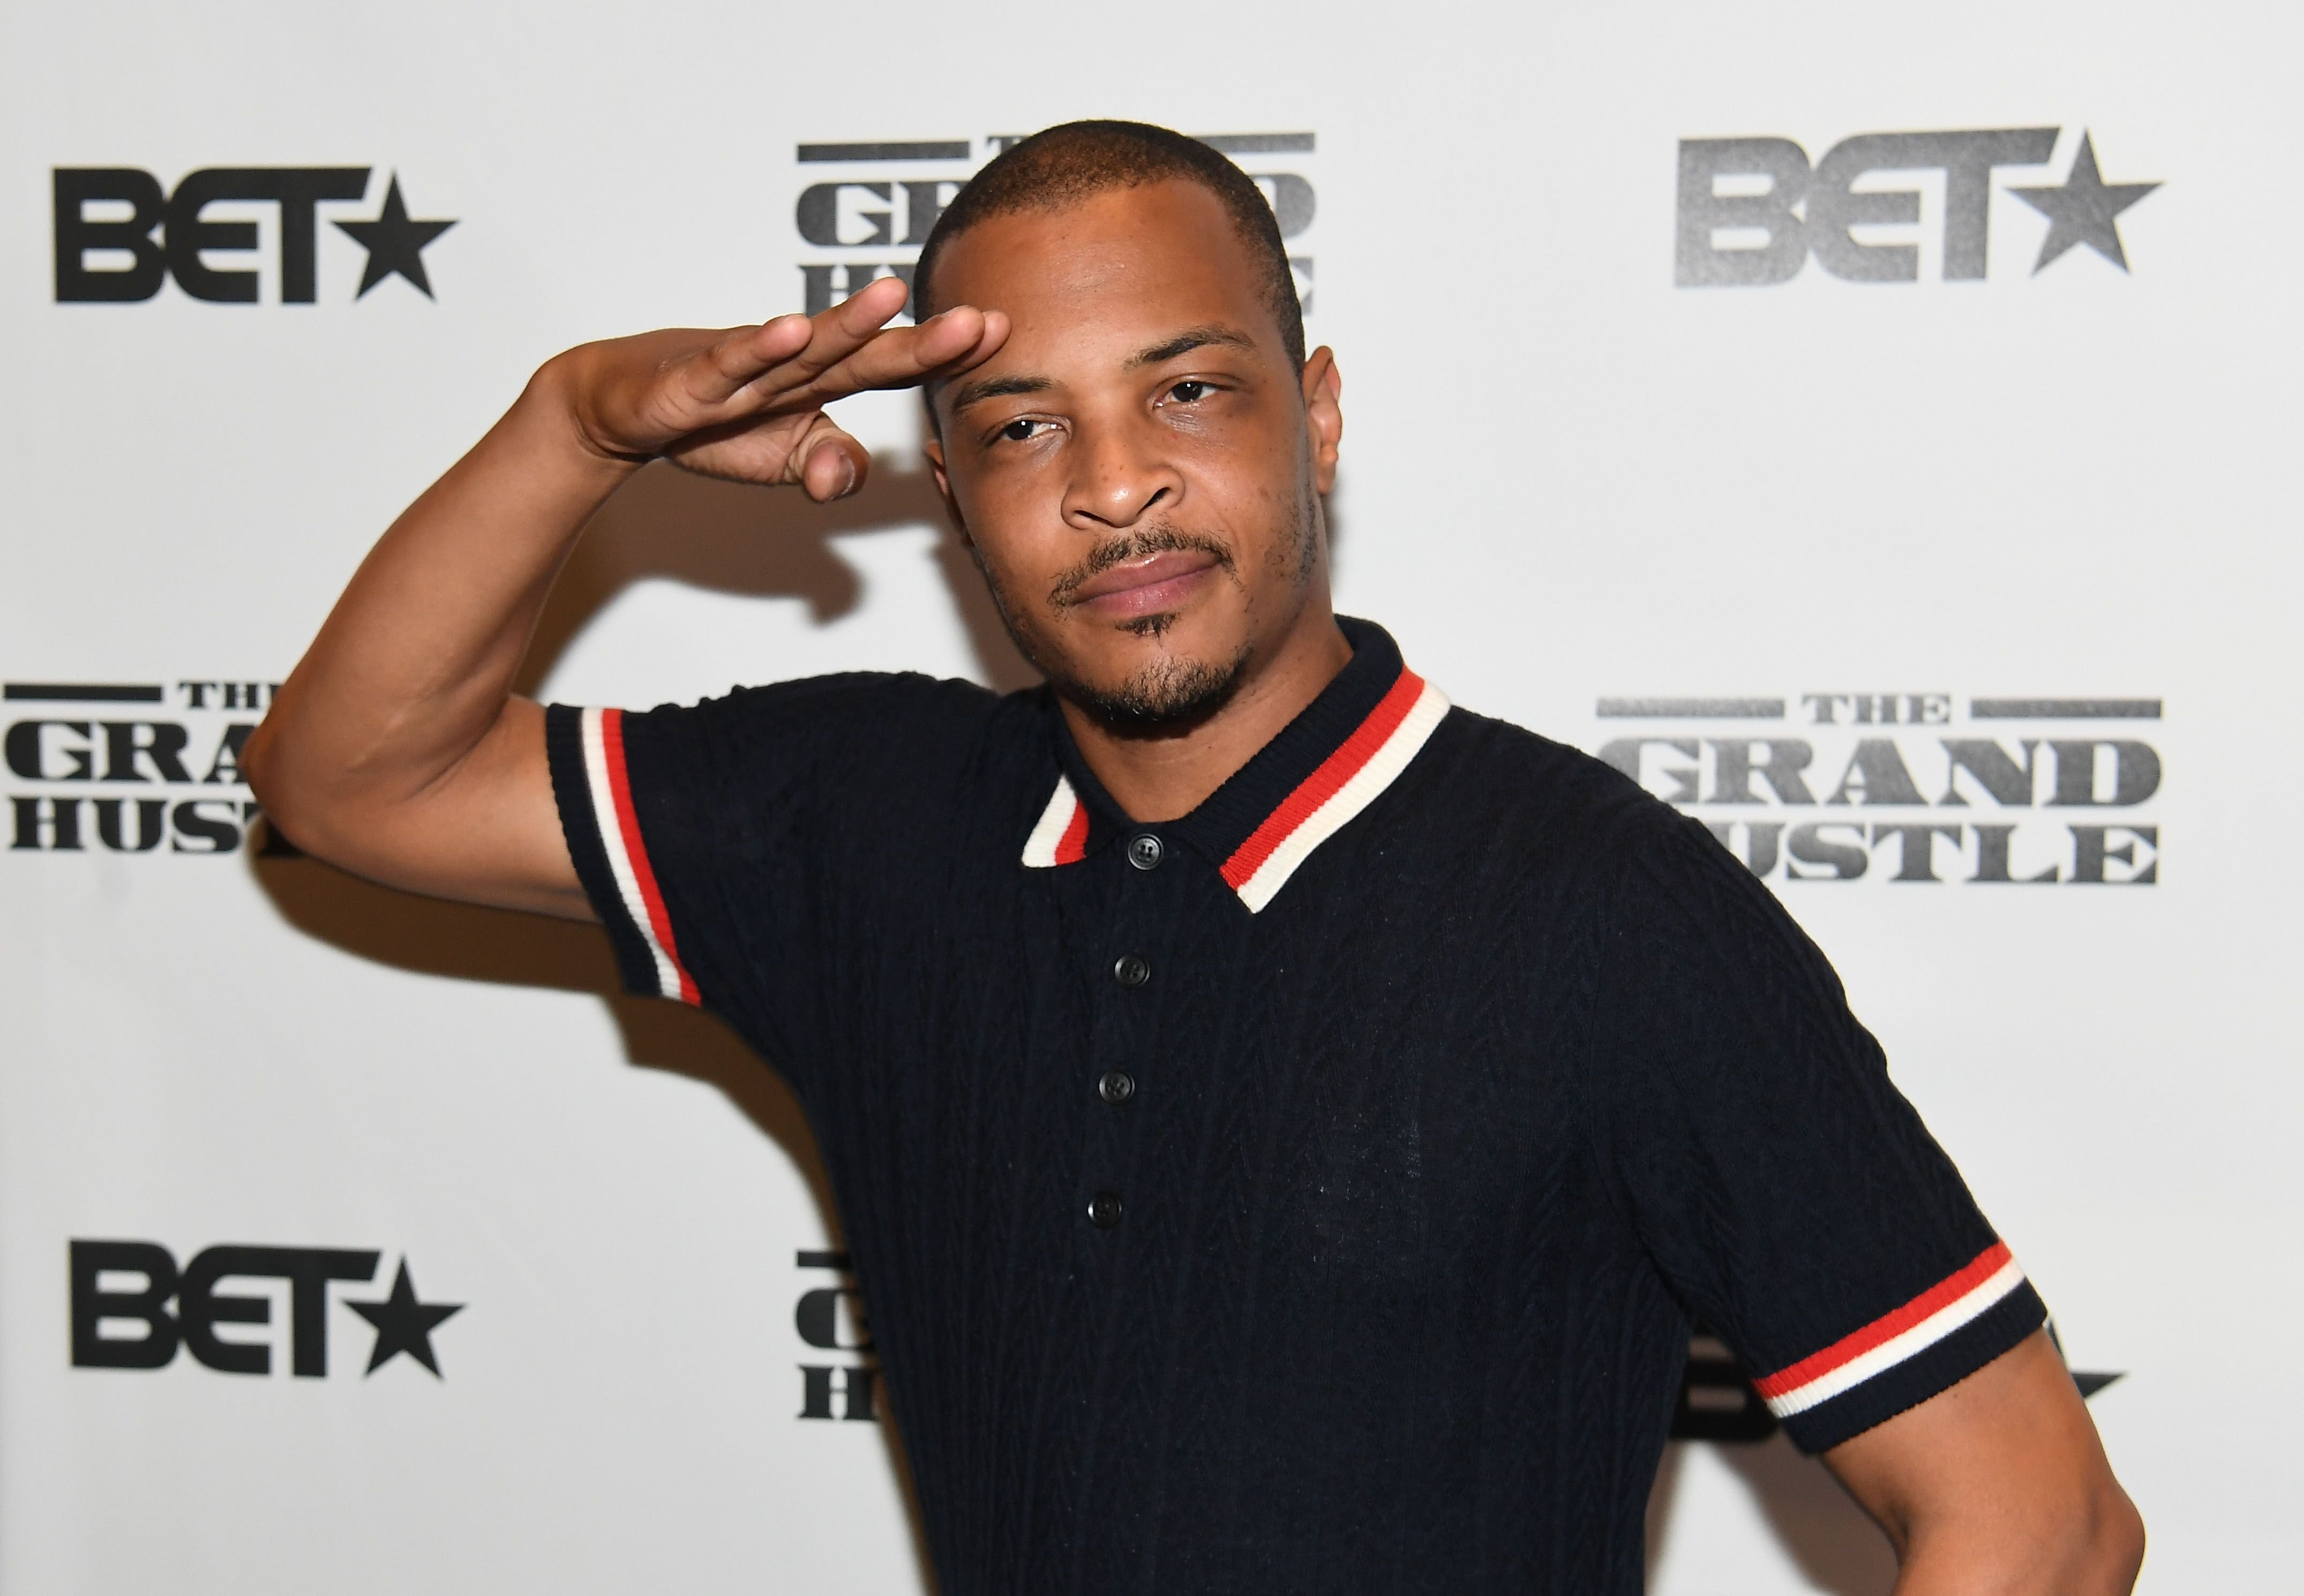 Rapper Tip "T.I." Harris at a BET event for "The Grand Hussle"/ Source: Getty Images